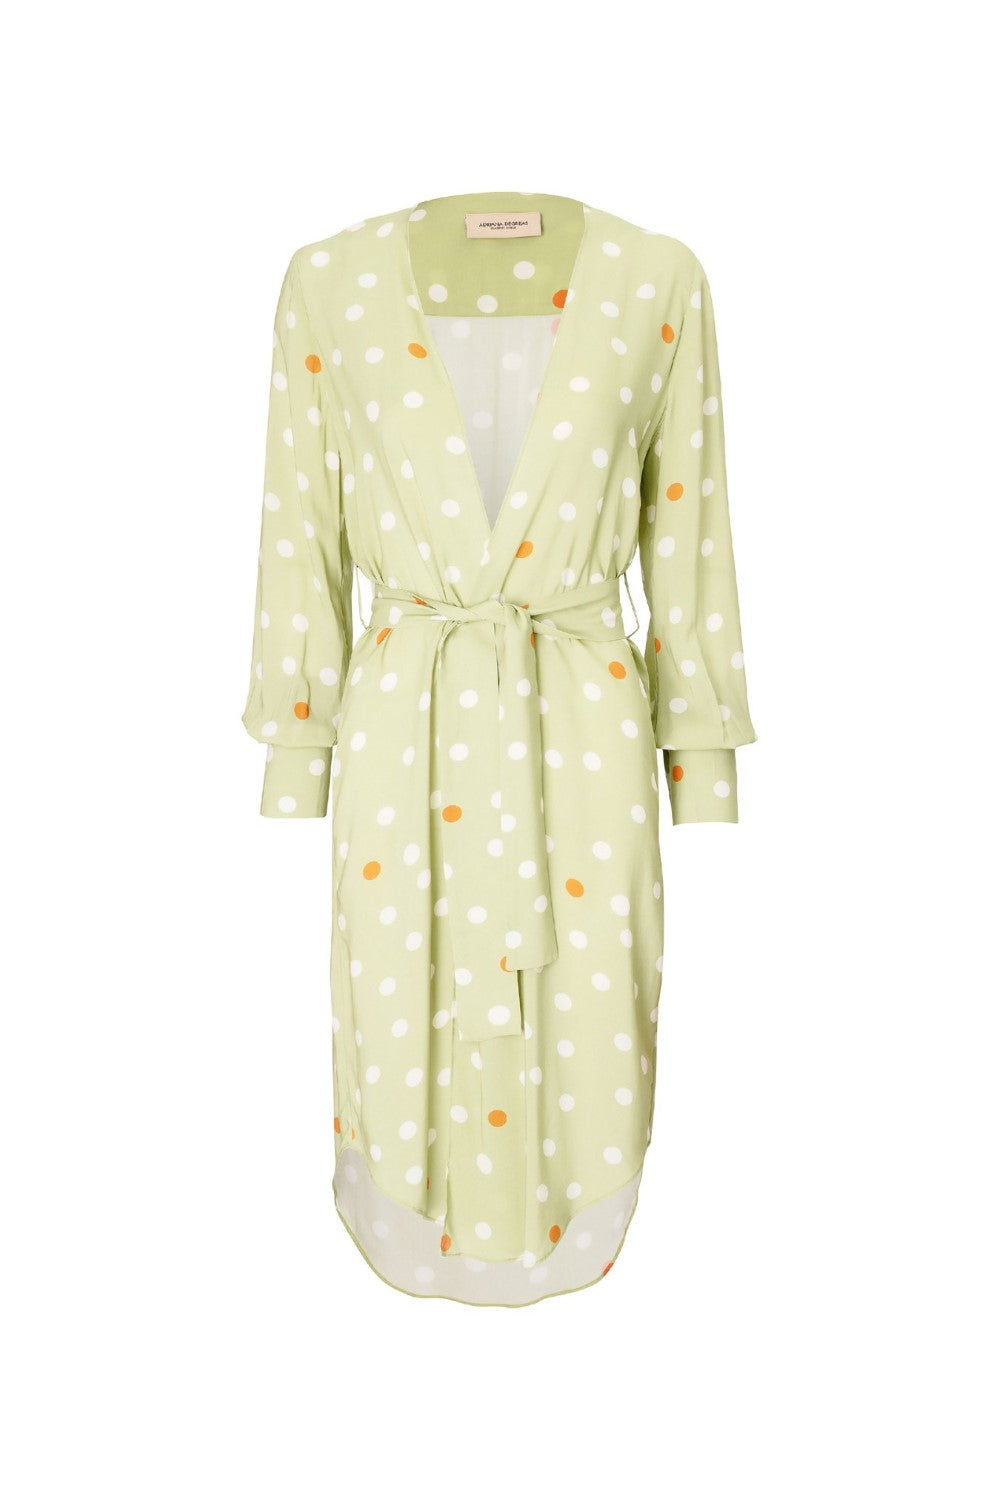 This retro polka dot midi robe comes in a loose silhouette with a matching belt at the waist for a perfect fit